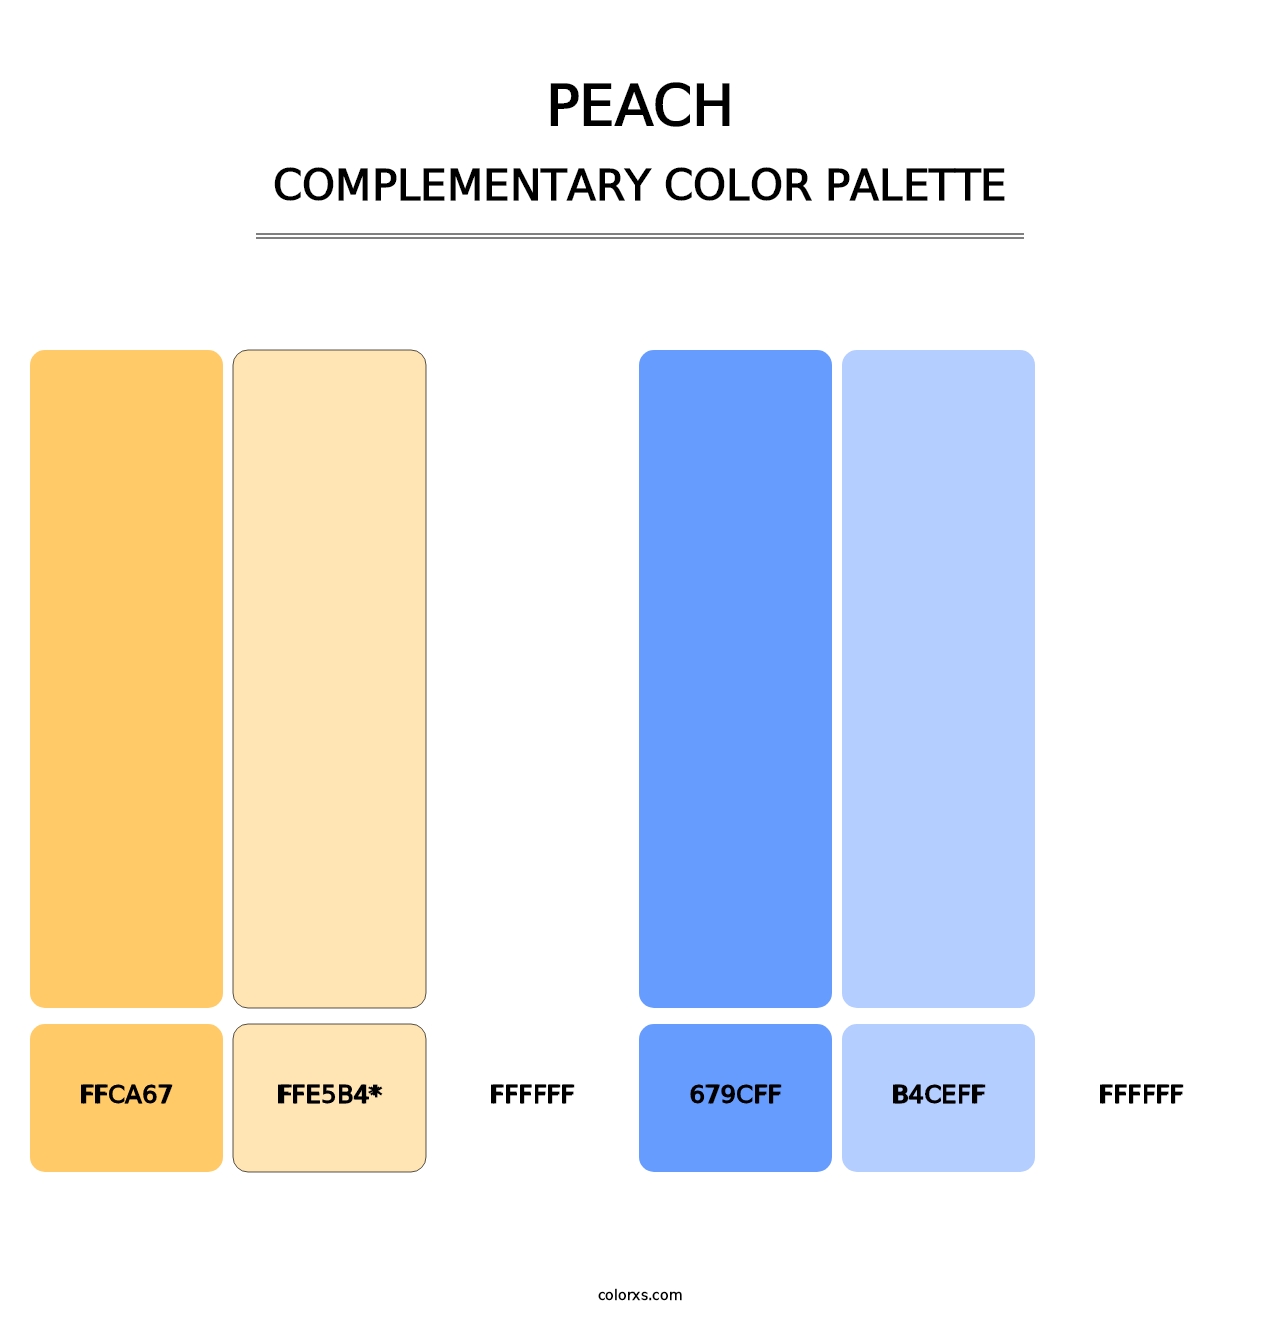 Peach - Complementary Color Palette